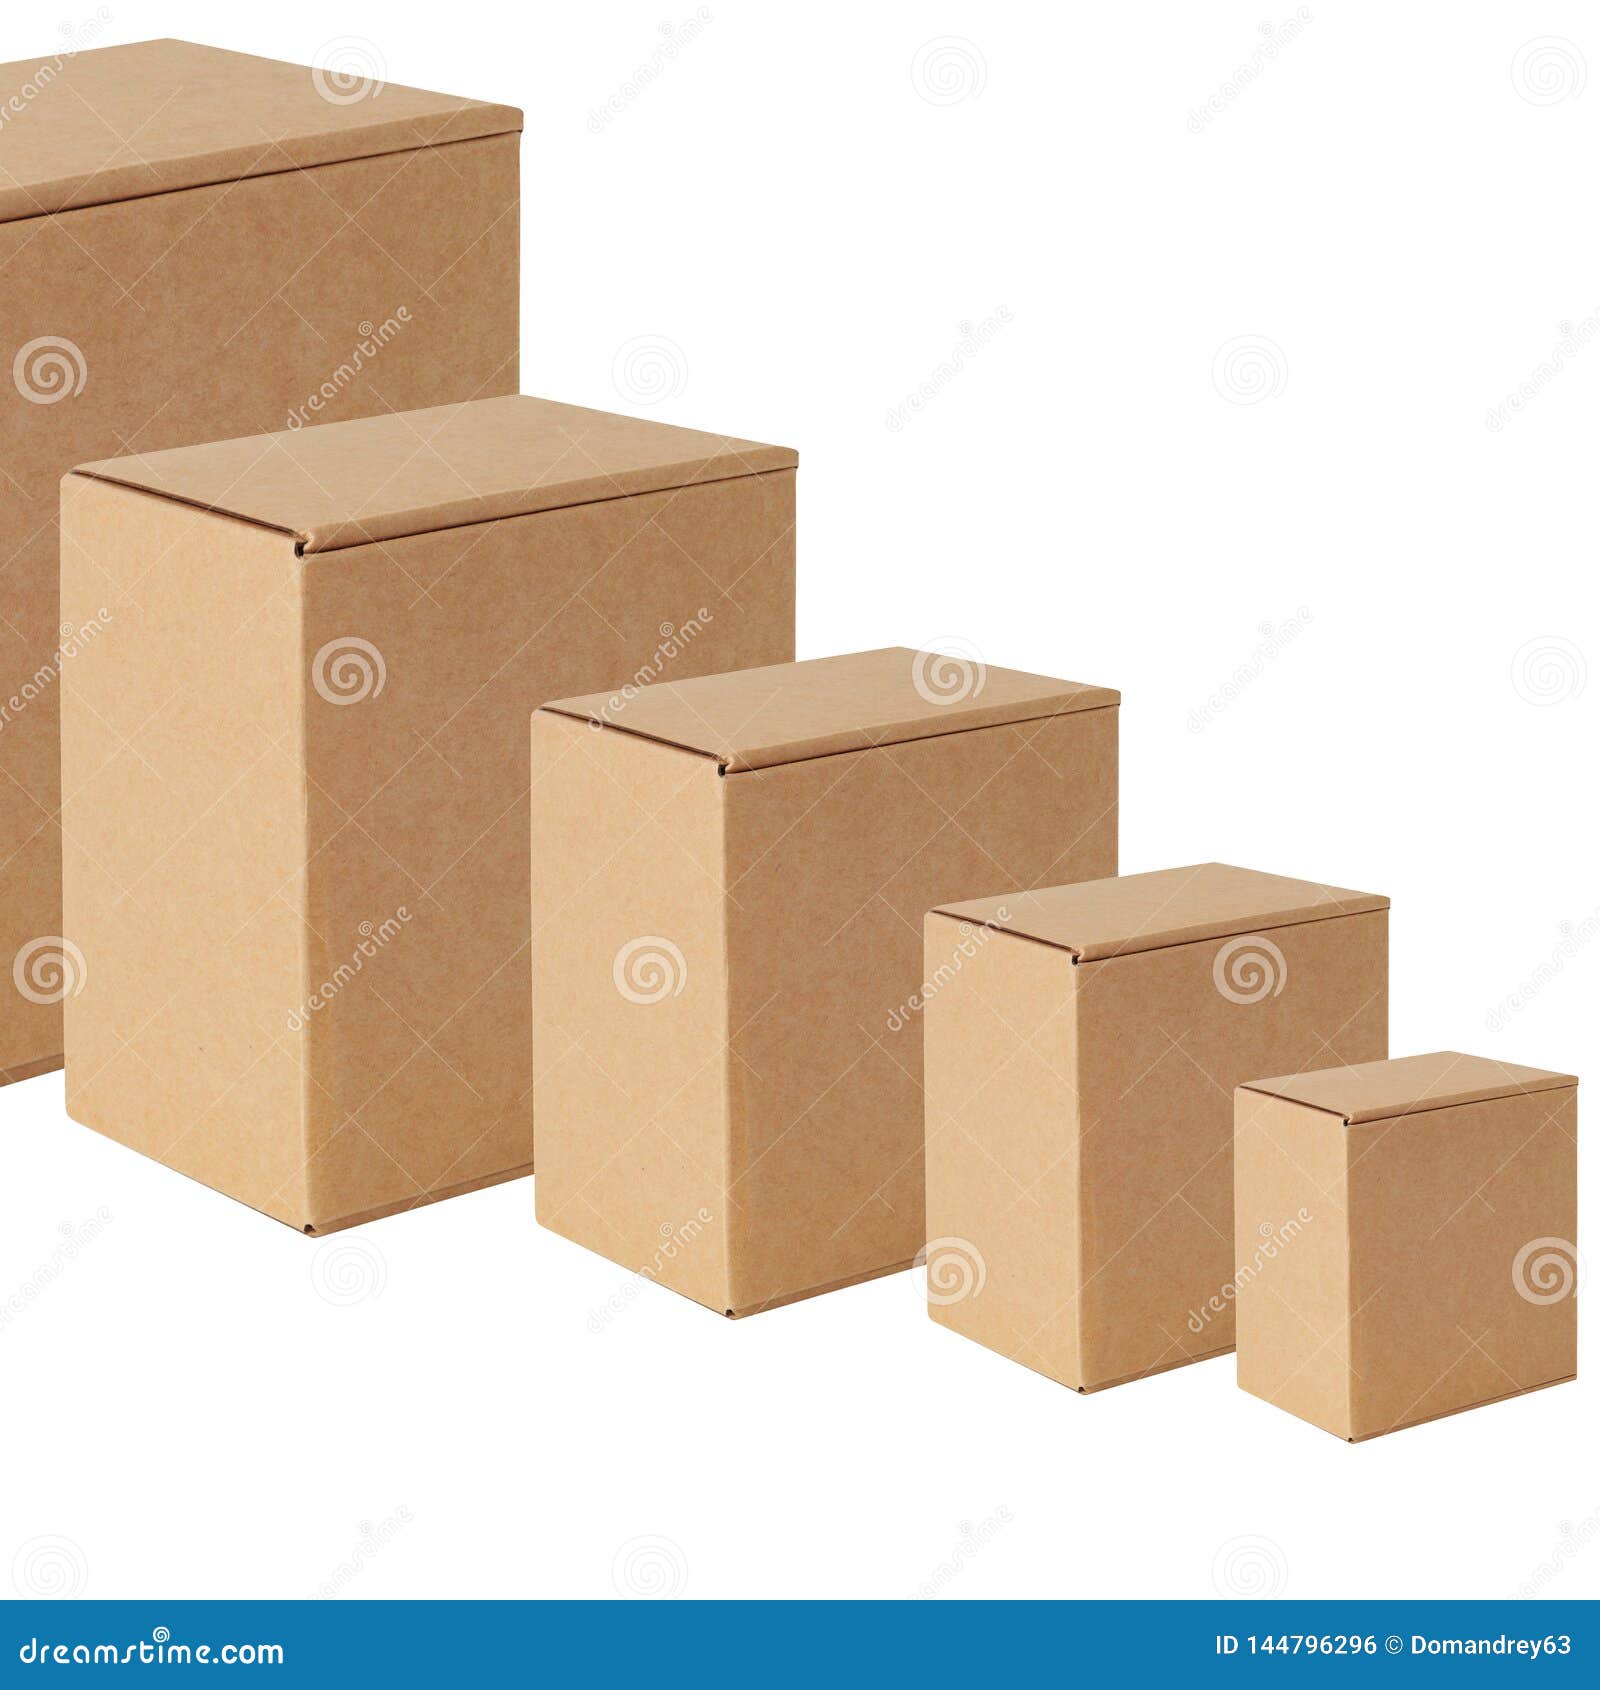 Cardboard Boxes of Various Sizes are Arranged in a Row Diagonally